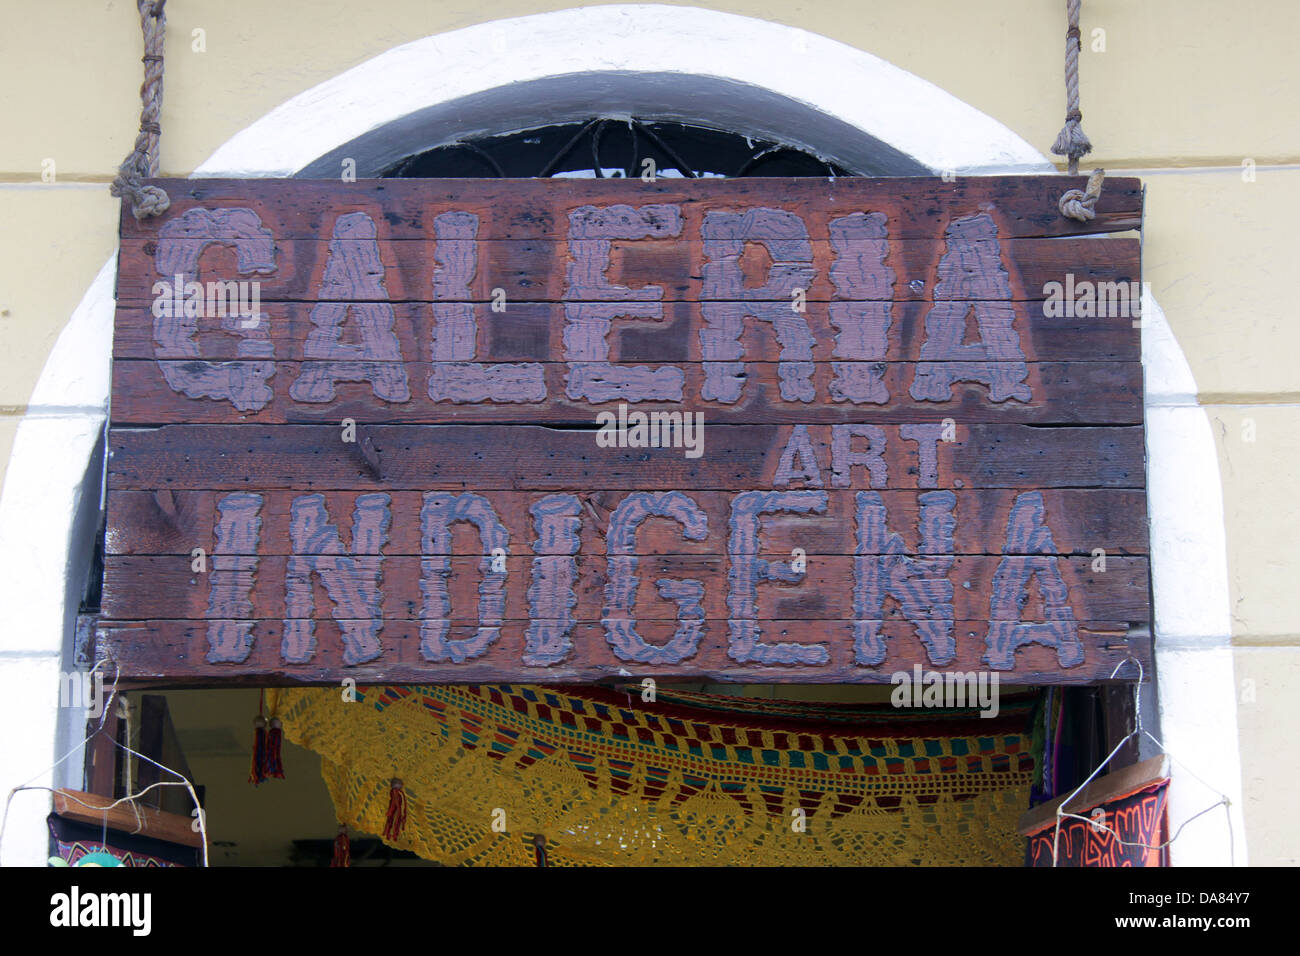 Street sign of a shop written in Spanish with the words indigenous art gallery, made of wood and hanging on a door arch. Stock Photo